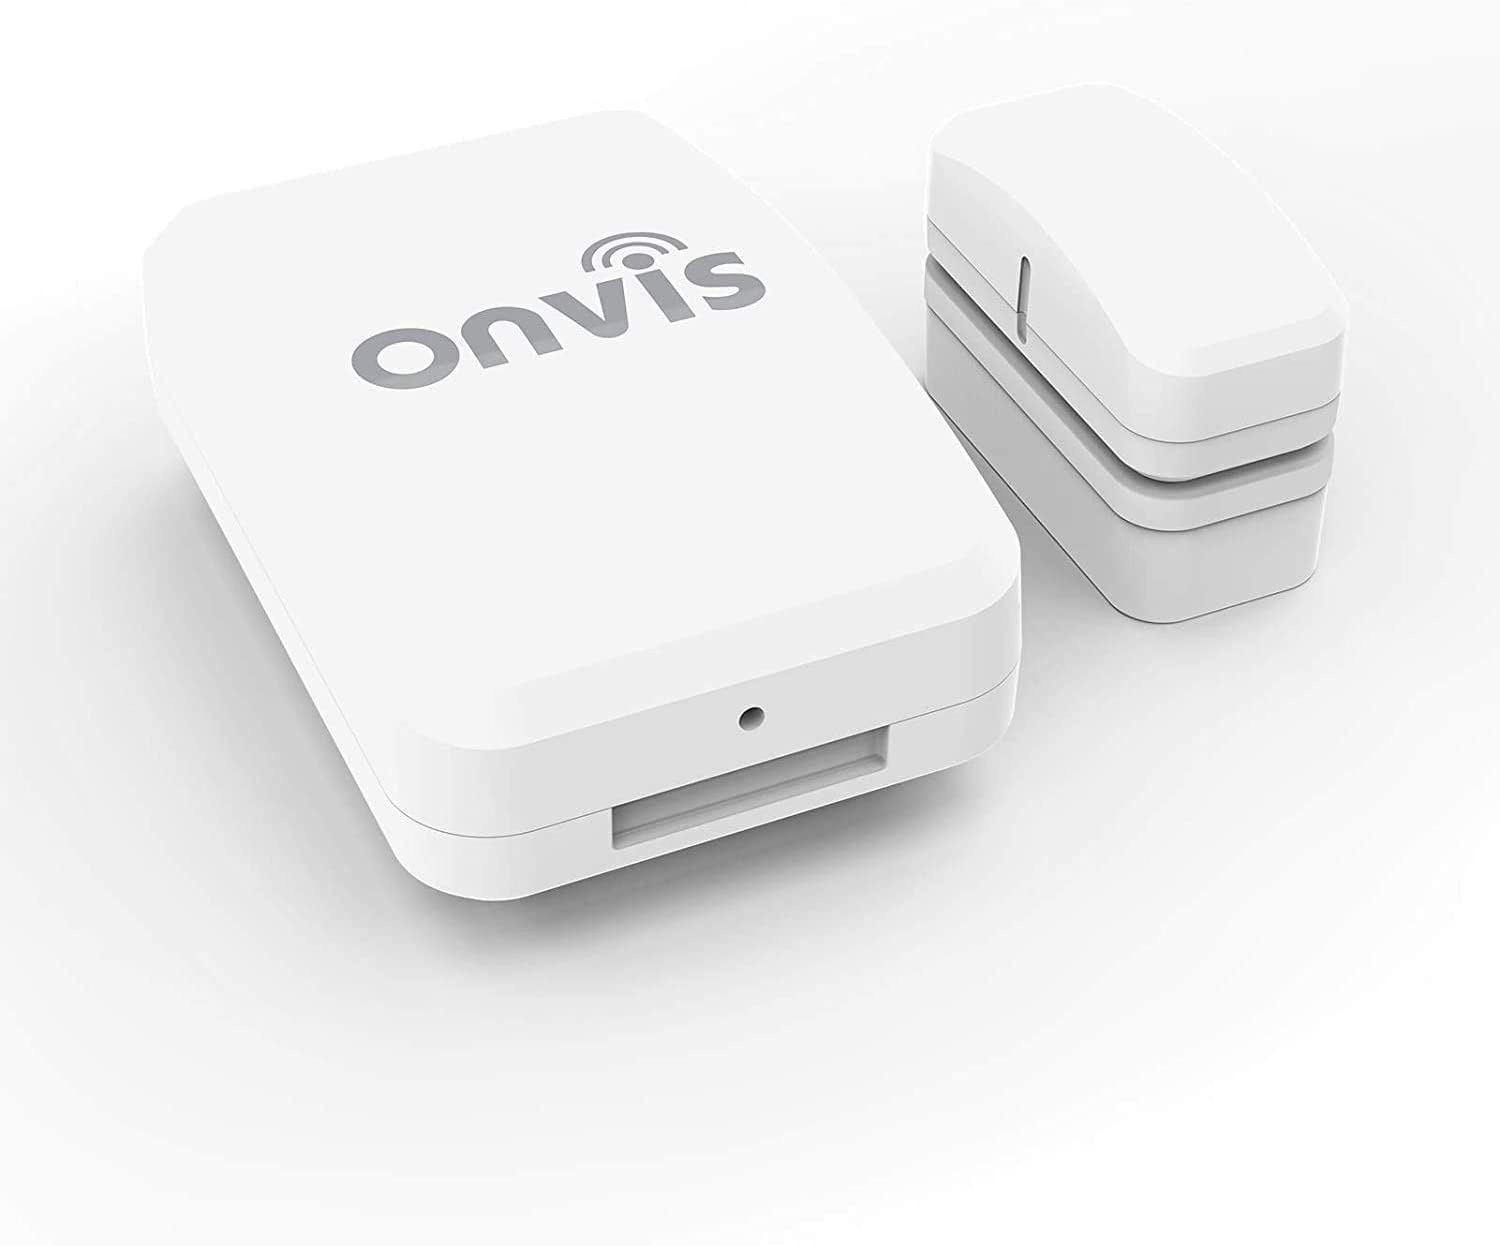 The Onvis Bluetooth 5.0 contact sensor is available for pre order